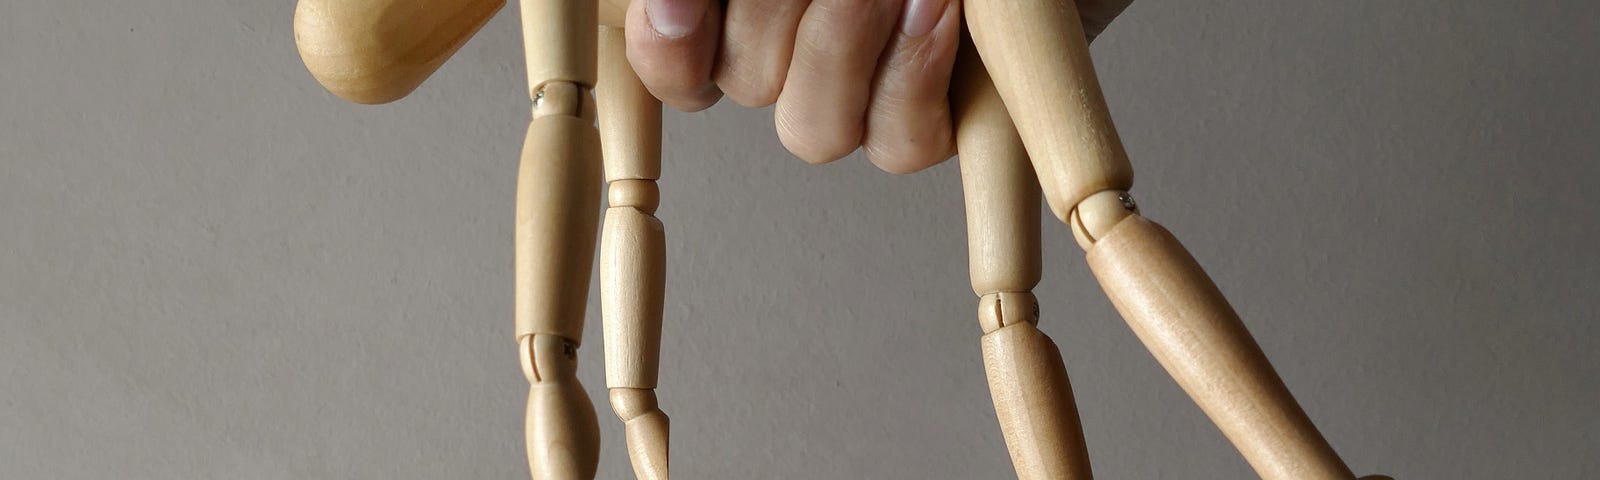 A figurine used by artists for drawing forms being gripped in a hand around the middle from above so their head, arms, and legs dangle.